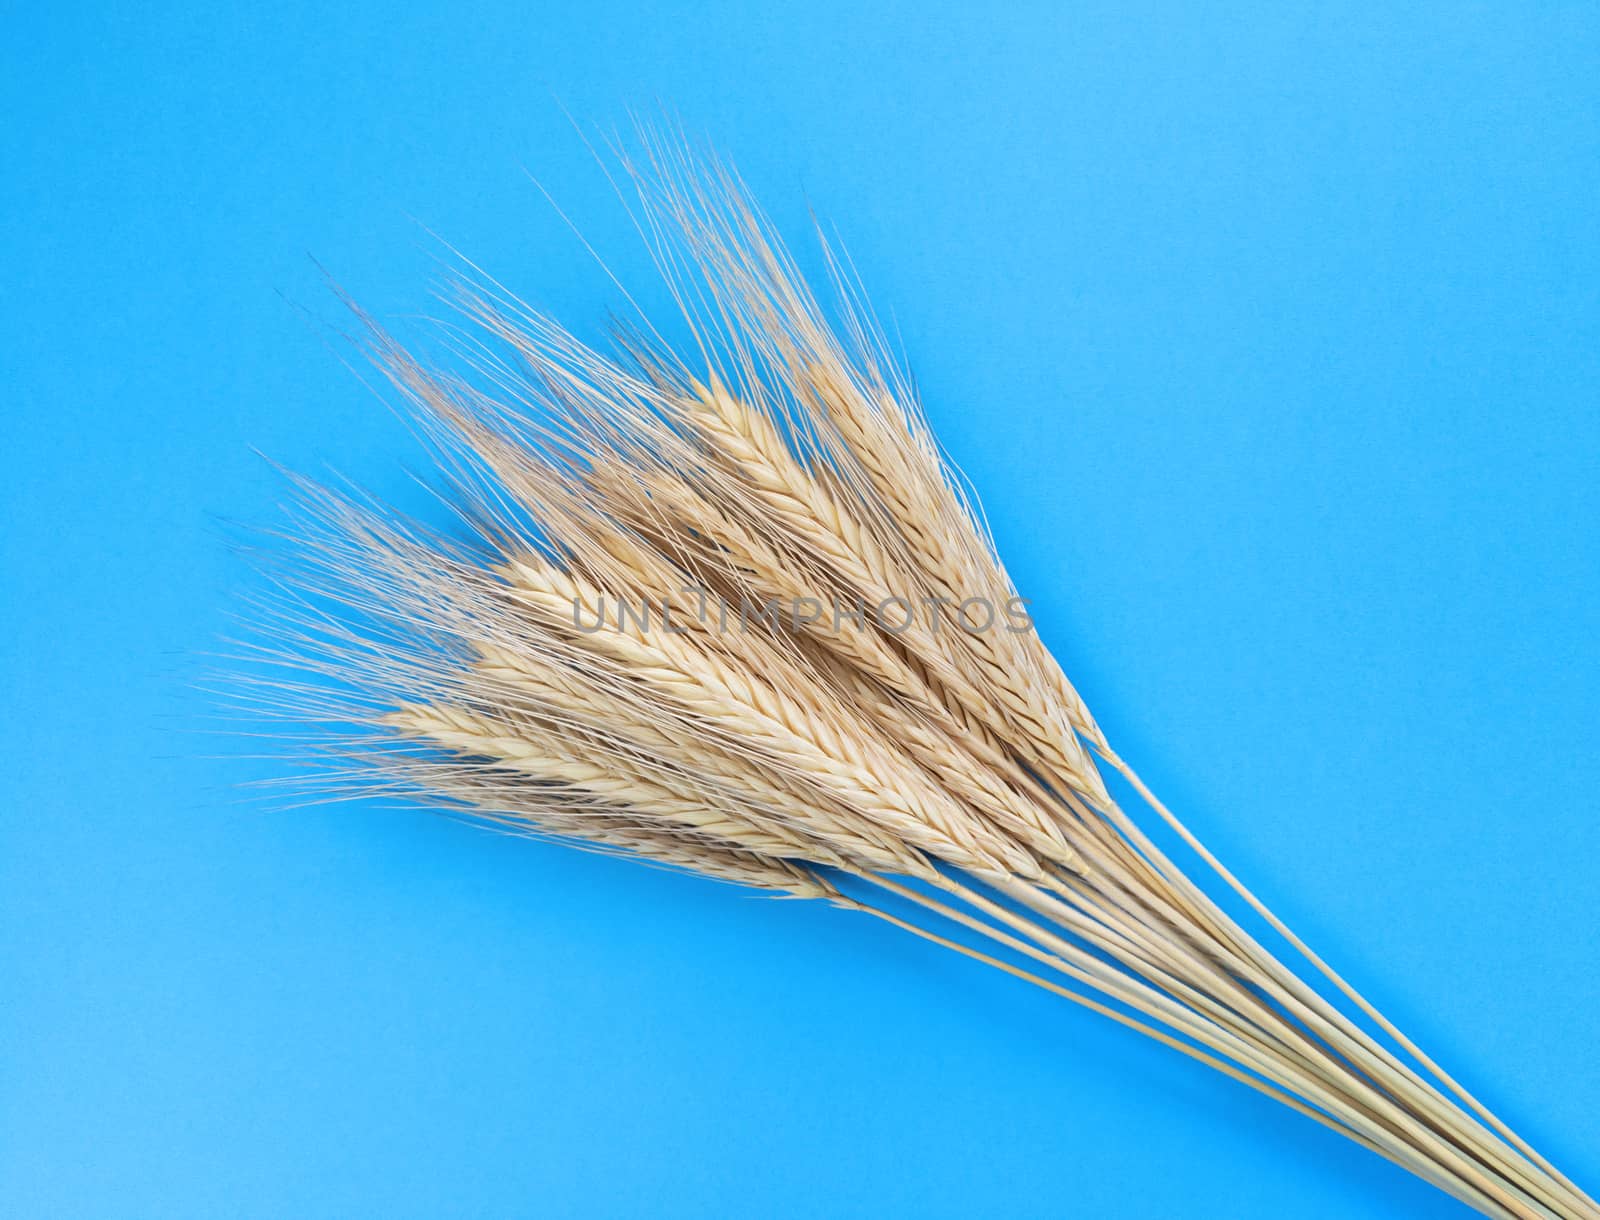 Spikelets of rye on a blue background. Simple flat lay. Harvest concept. Stock photography.